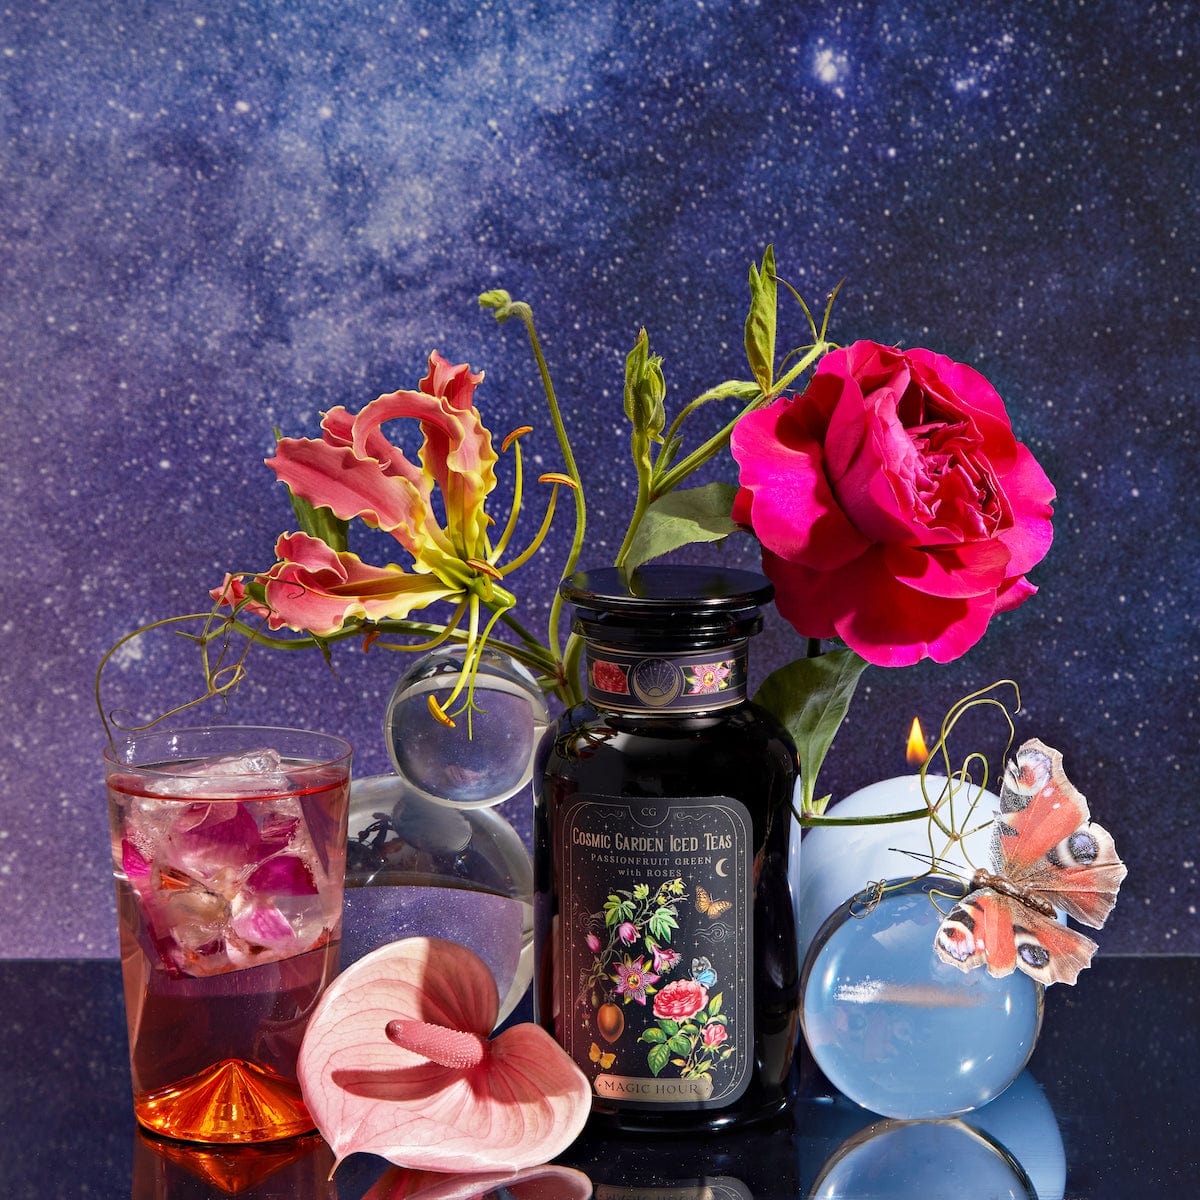 Passionfruit Green with Roses Iced Tea-Violet Glass Apothecary Jar (Includes with 12 Cold-Steep Sachets)-Magic Hour